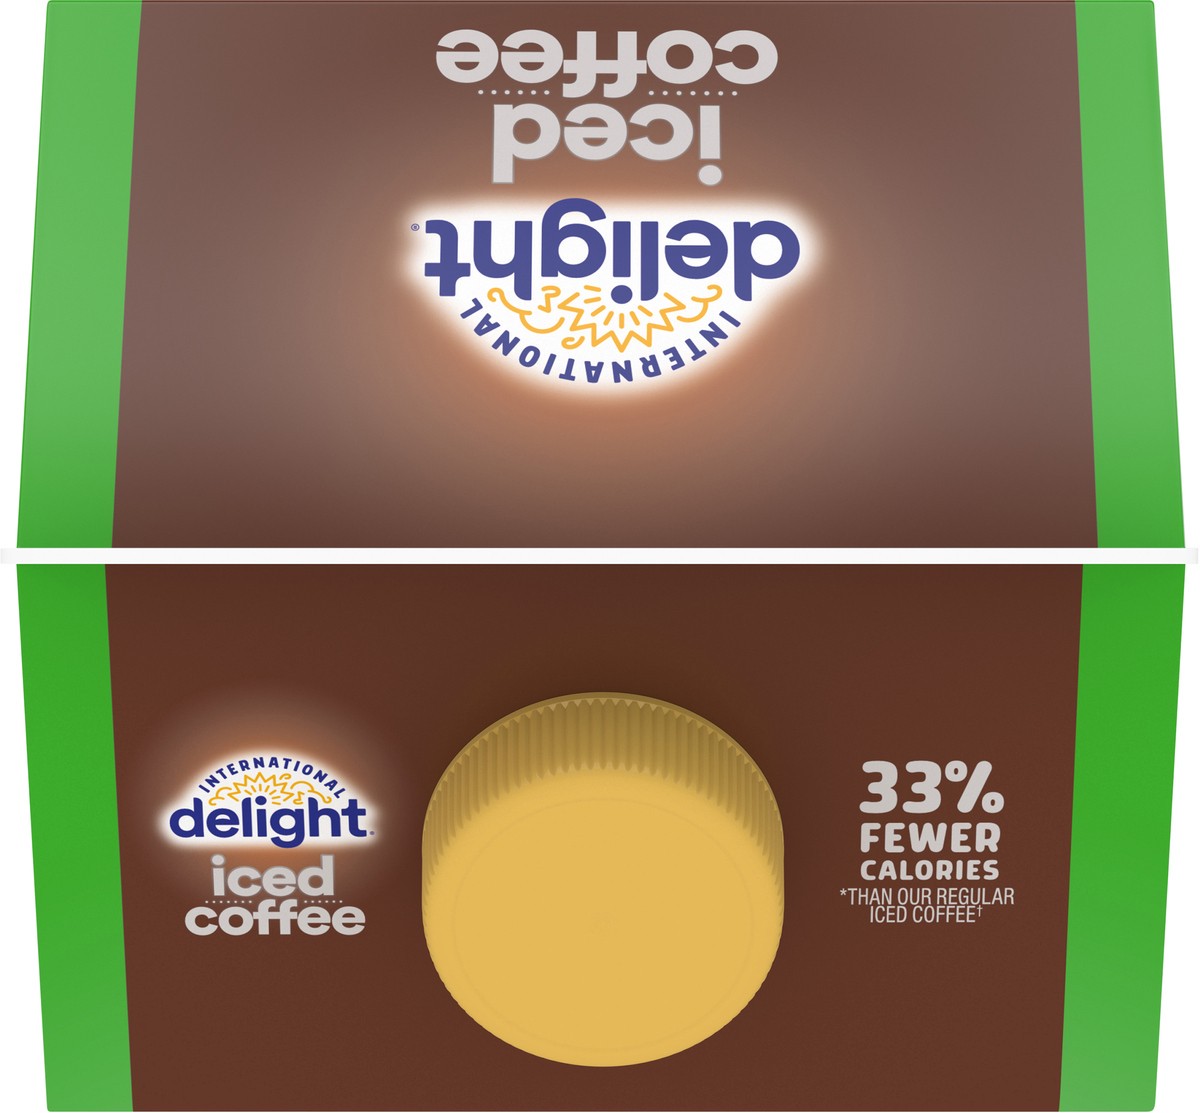 slide 3 of 9, International Delight Zero Iced Coffee, 0g Added Sugar, Mocha, Ready to Pour Coffee Drinks Made with Real Milk and Cream, 64 FL OZ Carton, 64 fl oz